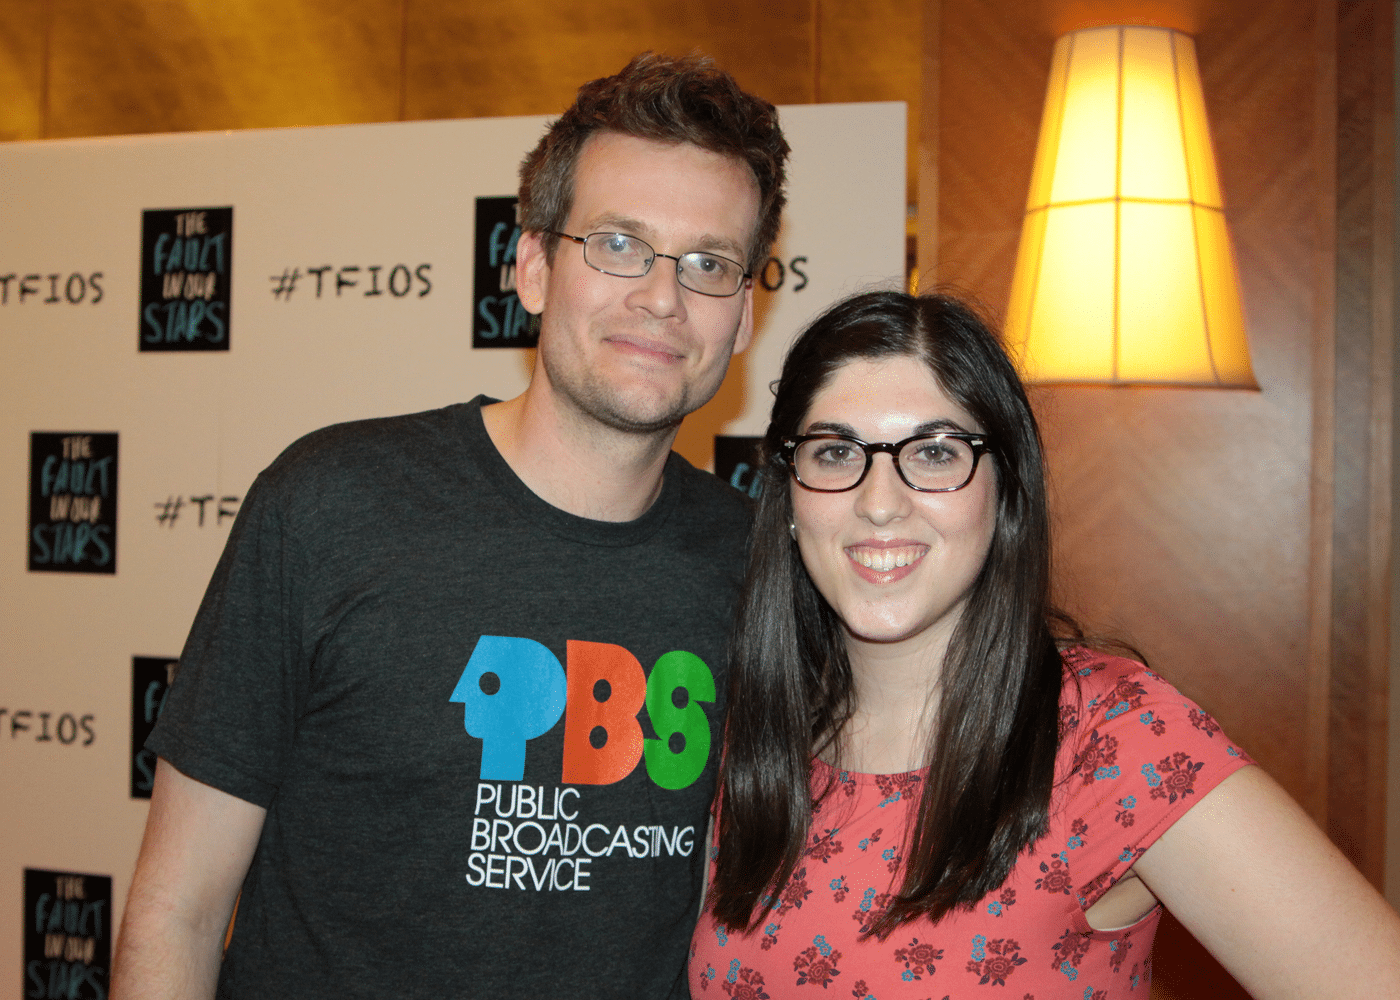 our intern posing with John Green at The Fault in our Stars opening